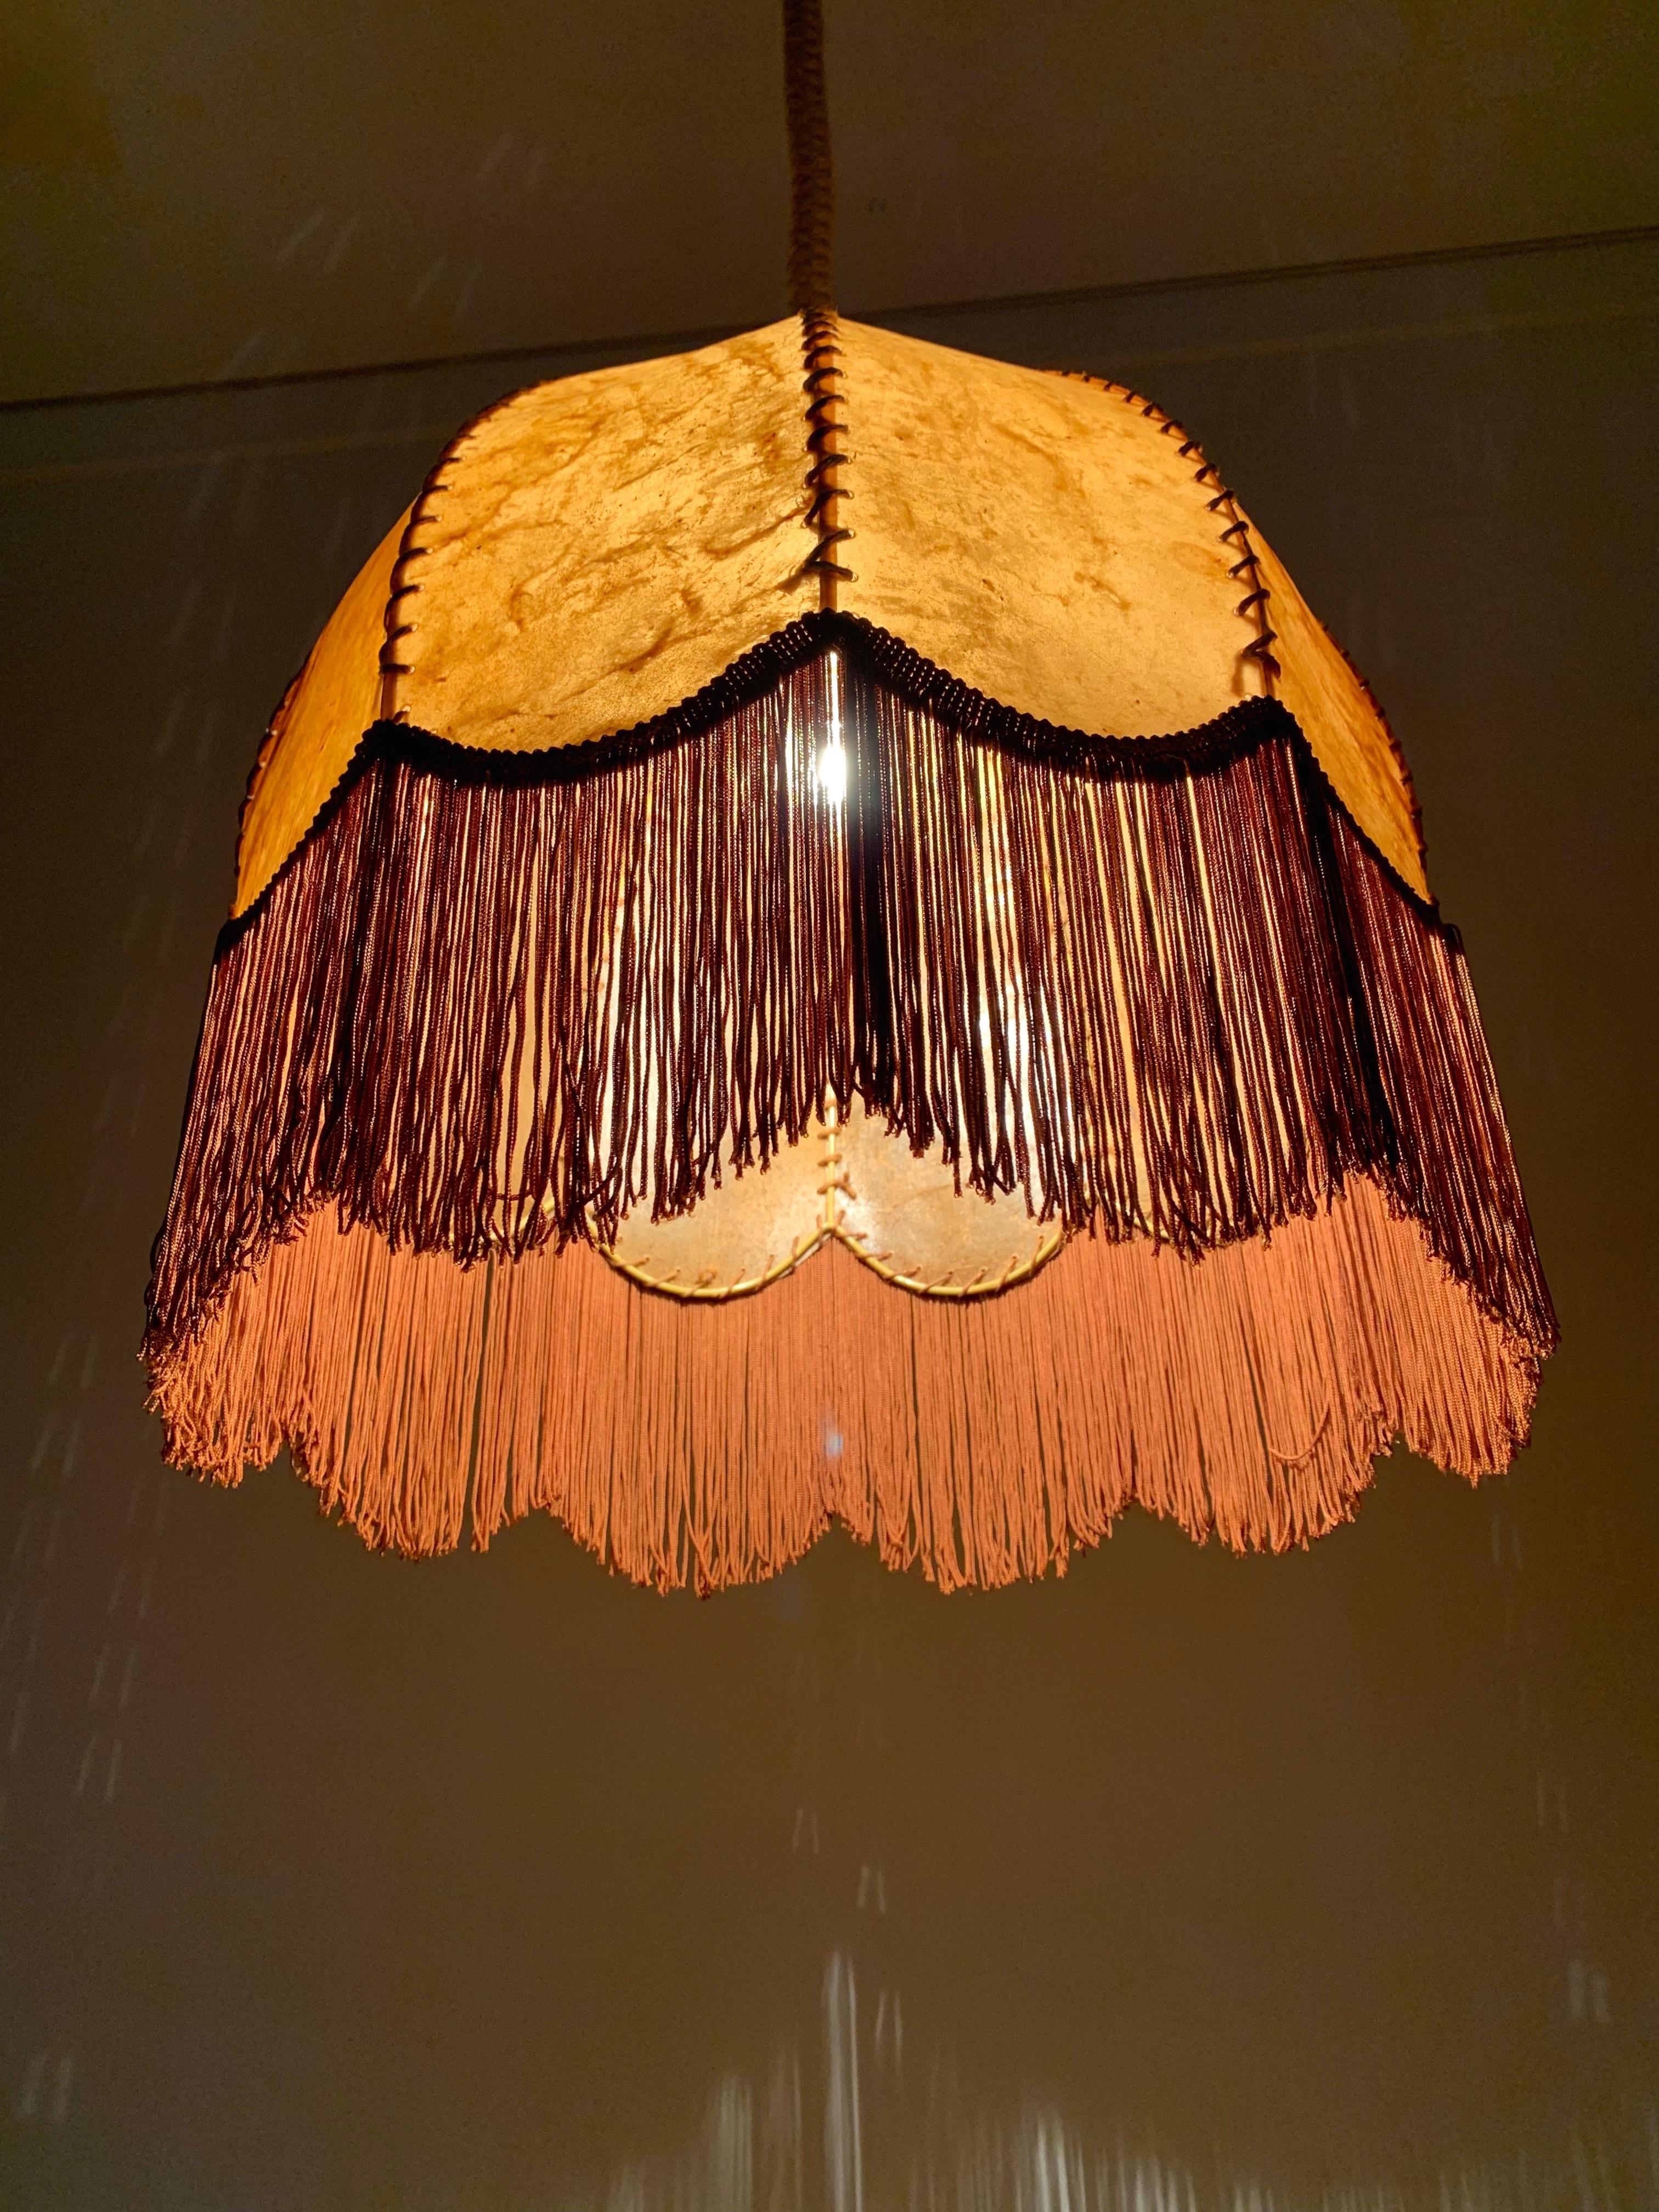 Good Looking Home Design Leather, Fringes, Wood and Rope Pendant Light, 1930s 1